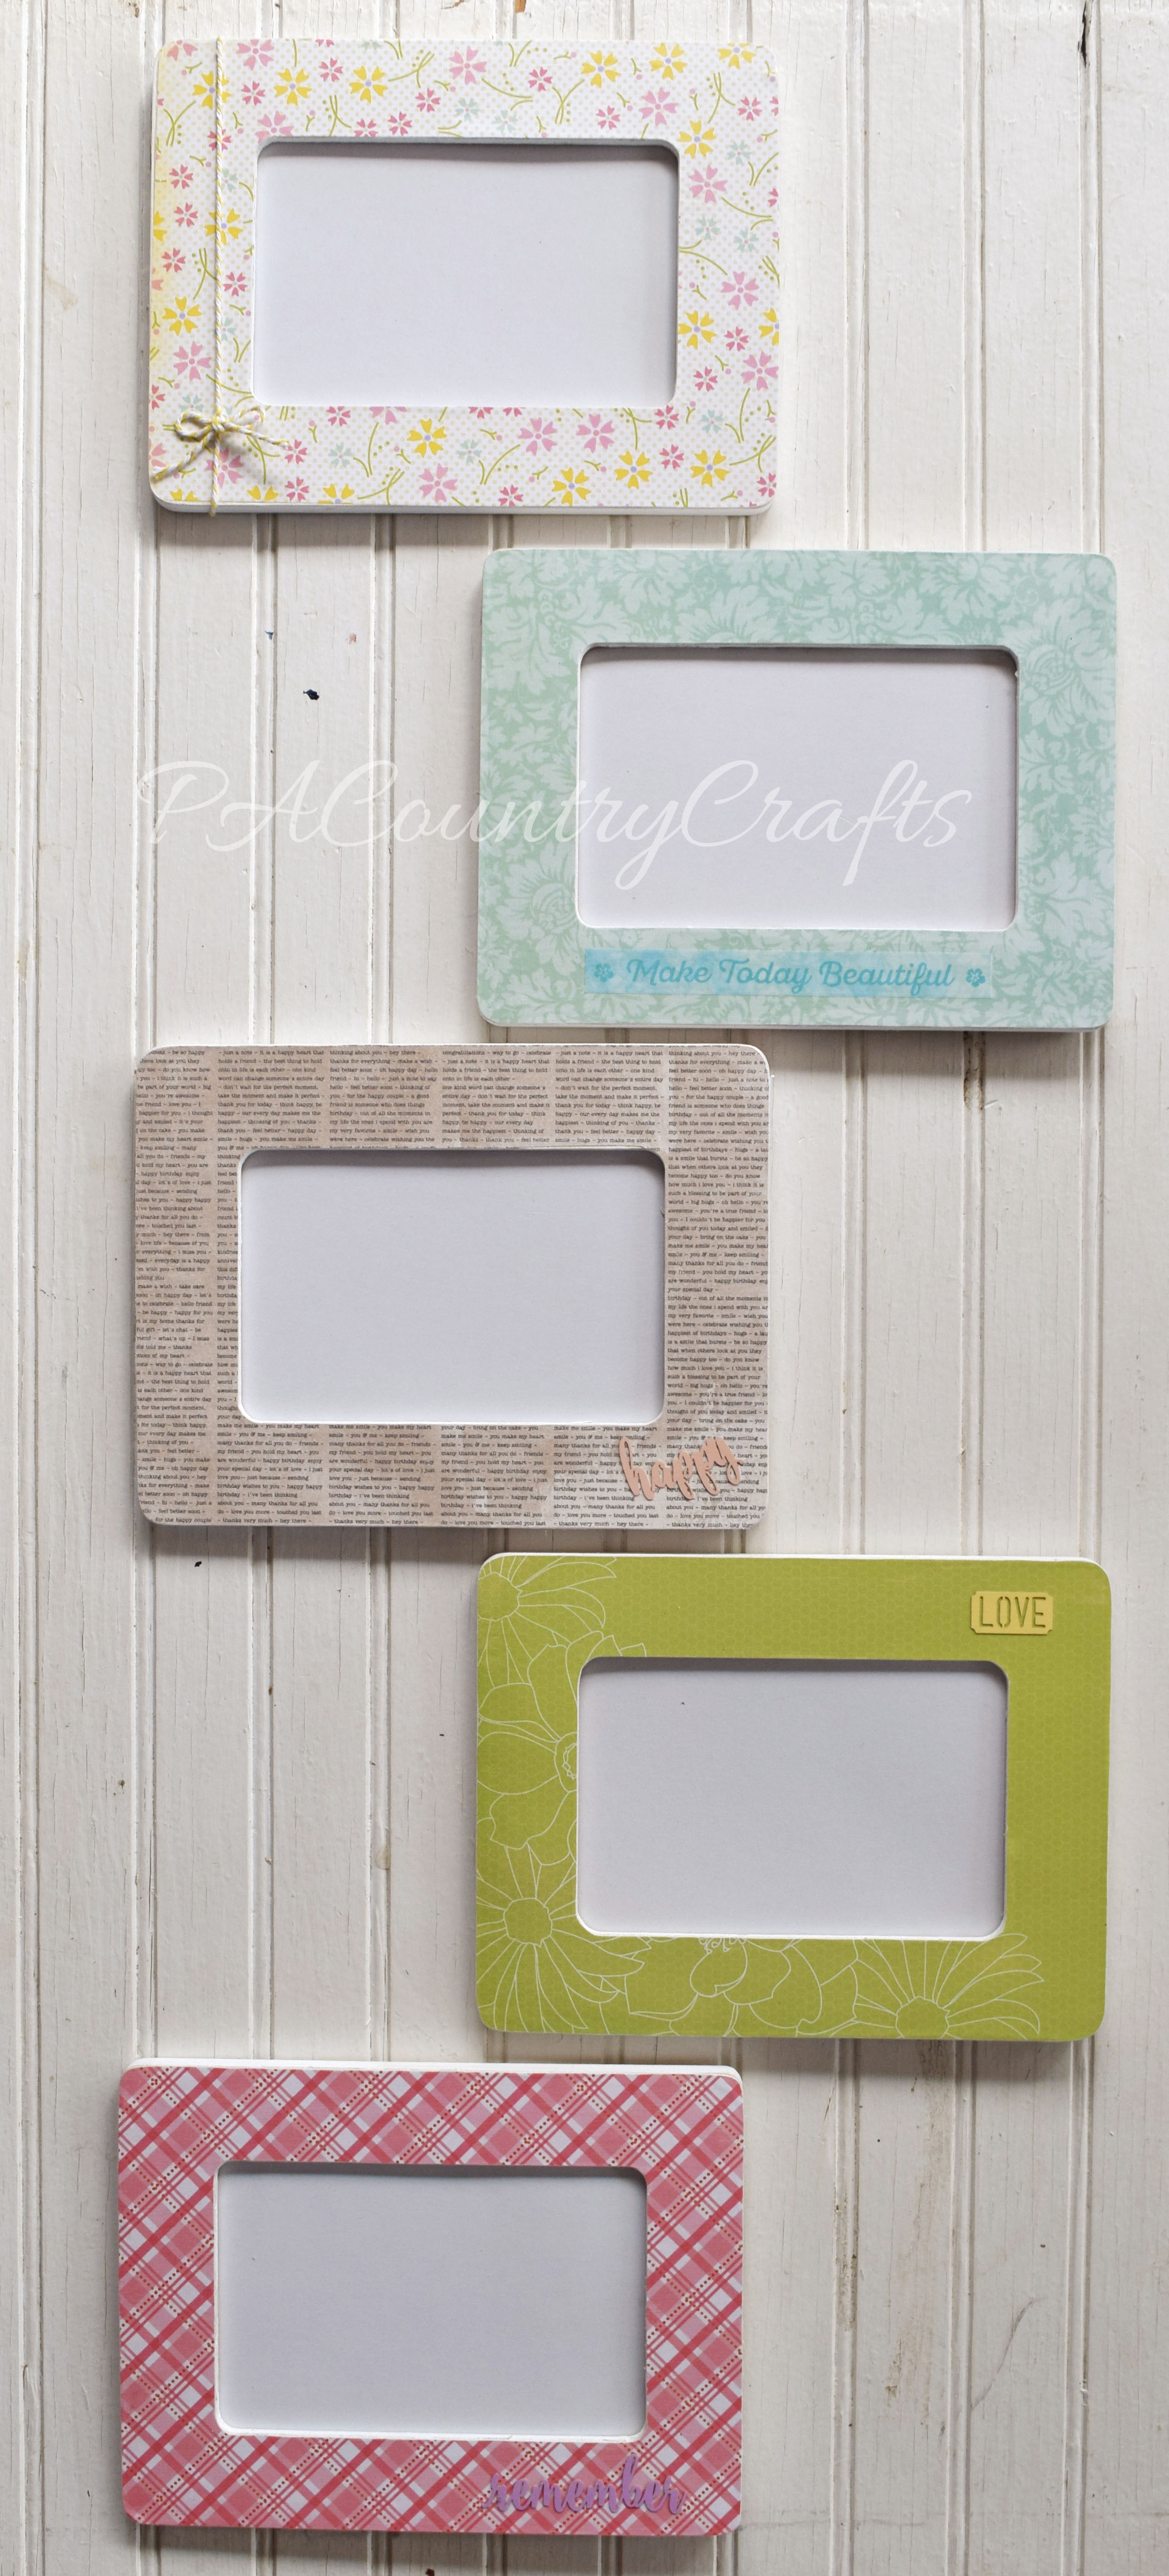 Cute and easy MOPS craft with picture frames!